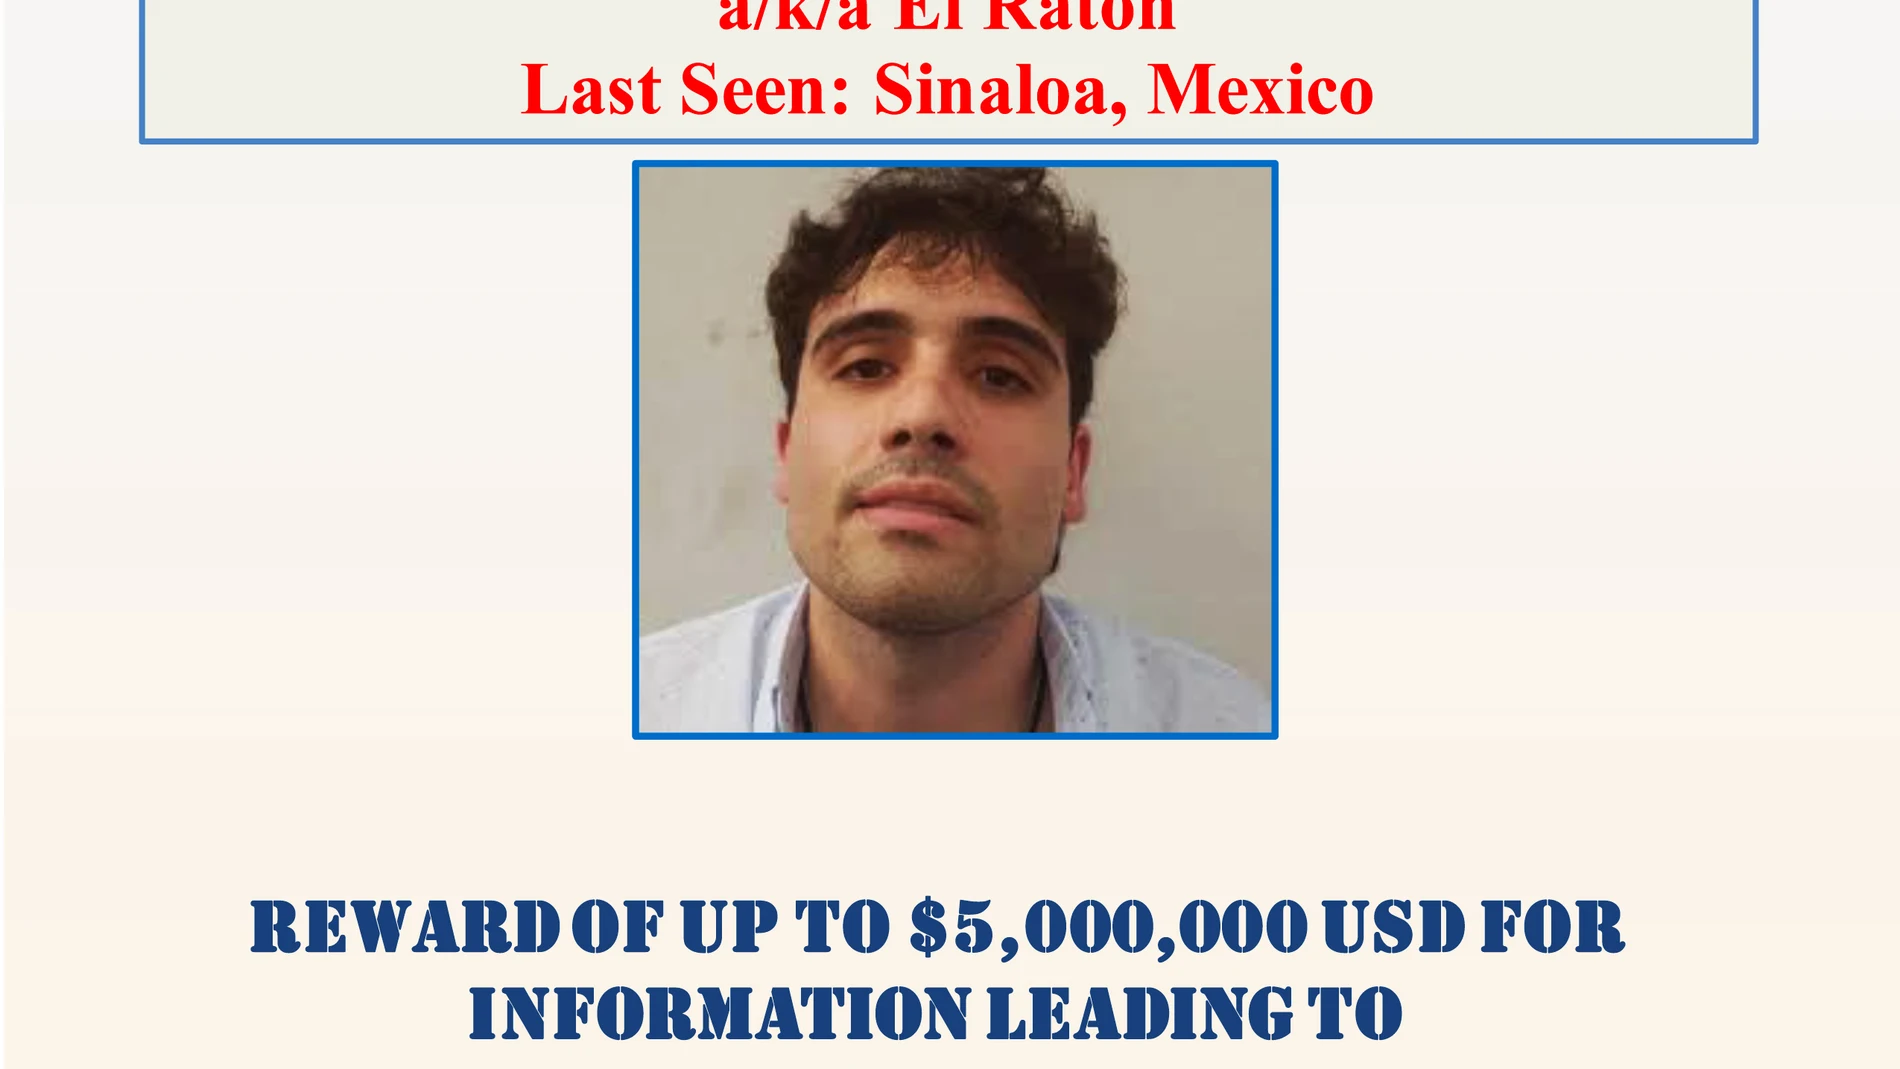 January 5, 2023, Sinaloa, Mexico, USA: Ovidio Guzman, the son of drug lord 'El Chapo,' has been arrested on suspicion of drug-related charges in an operation carried out by Mexico City federal authorities. A Homeland Security Wanted poster shows Ovidio Guzman-Lopez wanted for arrest. (Foto de ARCHIVO) 05/01/2023